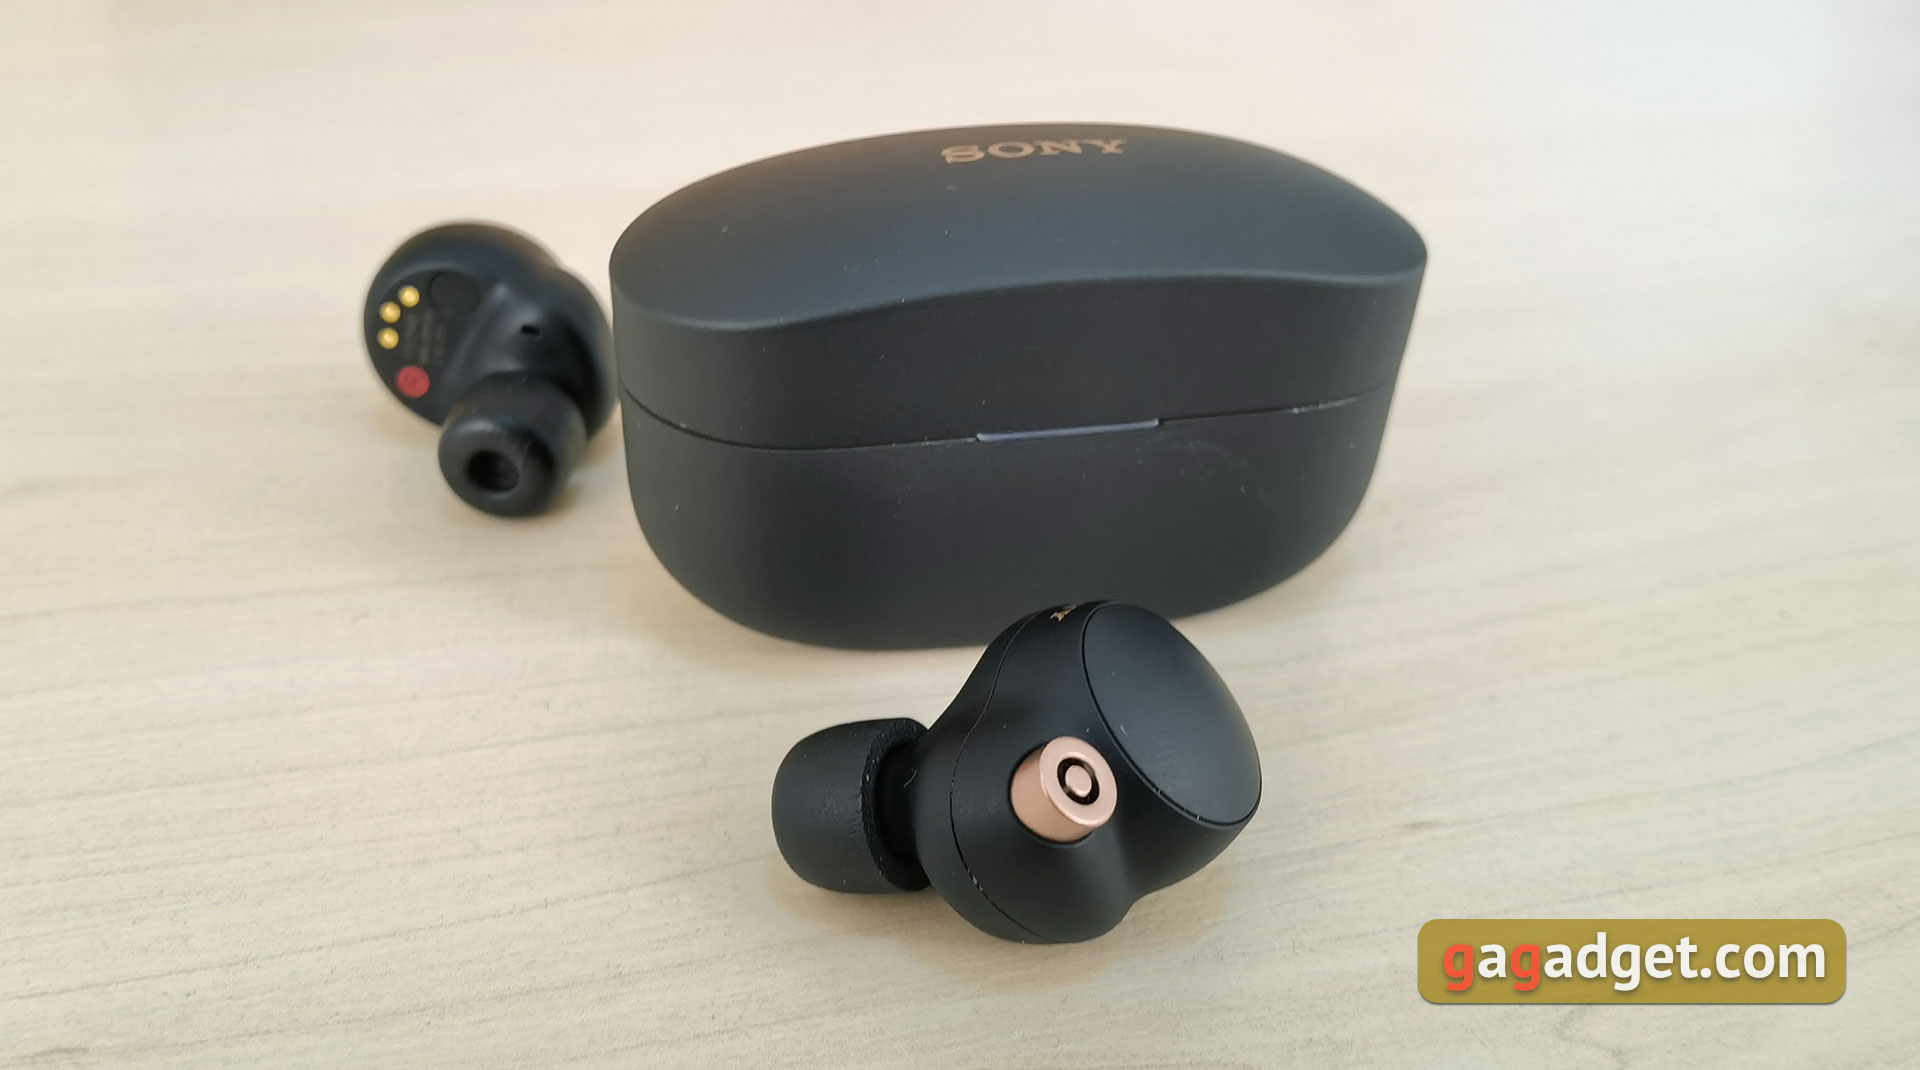 Sony WF-1000XM4 Review: Great ANC TWS Earbuds With Stellar Audio -  Counterpoint